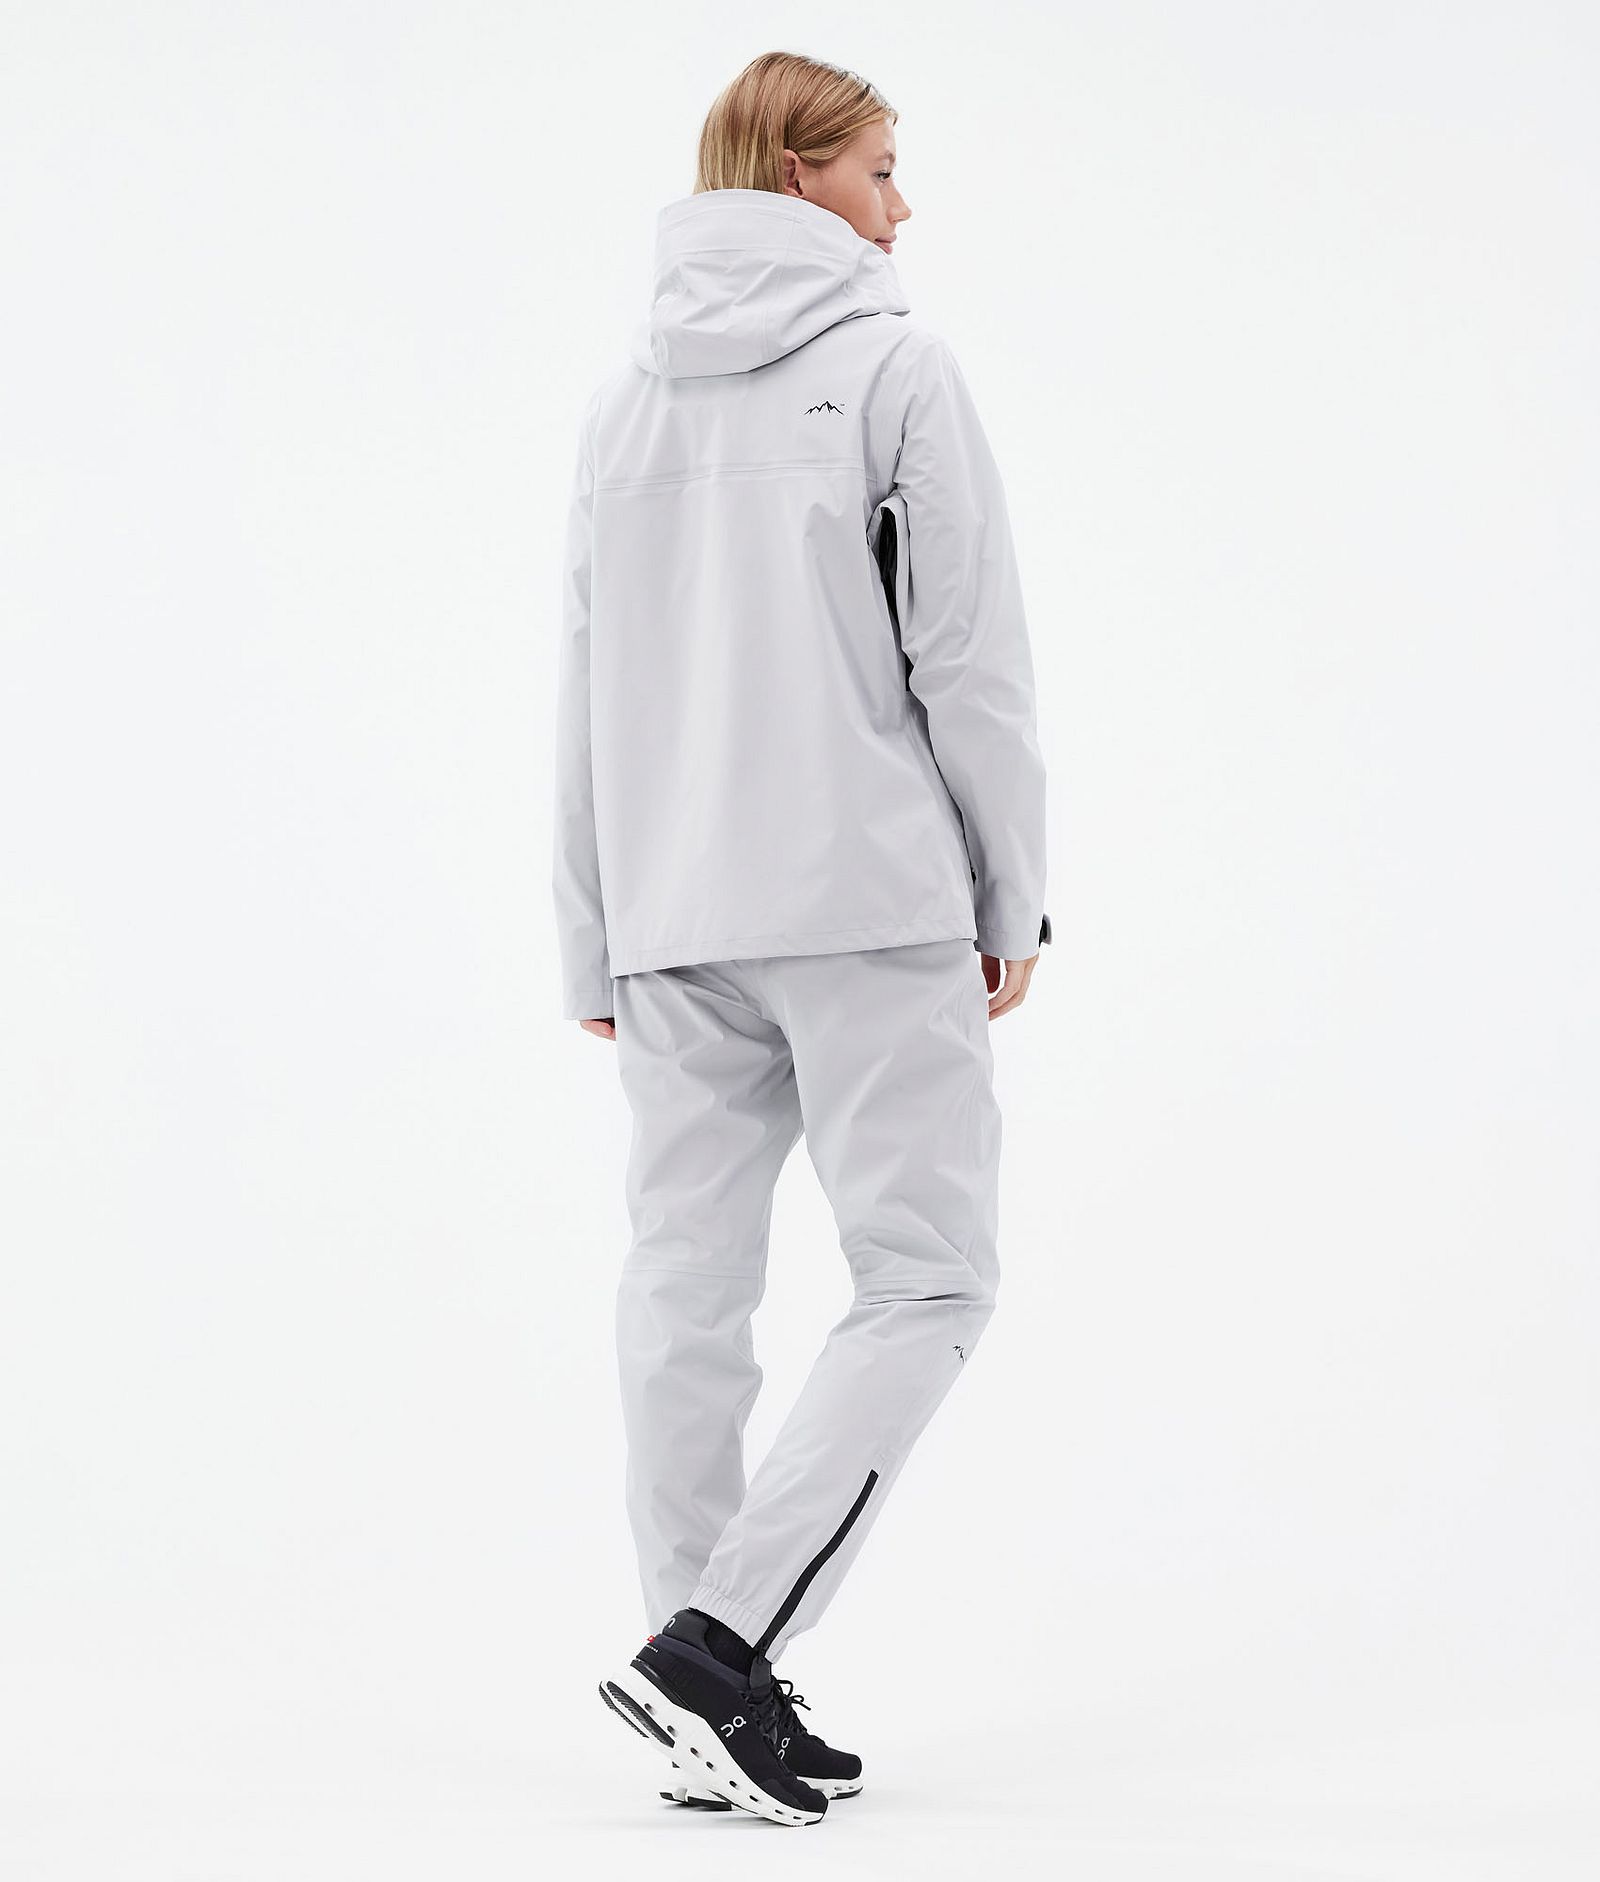 Dope Downpour W Outfit de Outdoor Mujer Light Grey